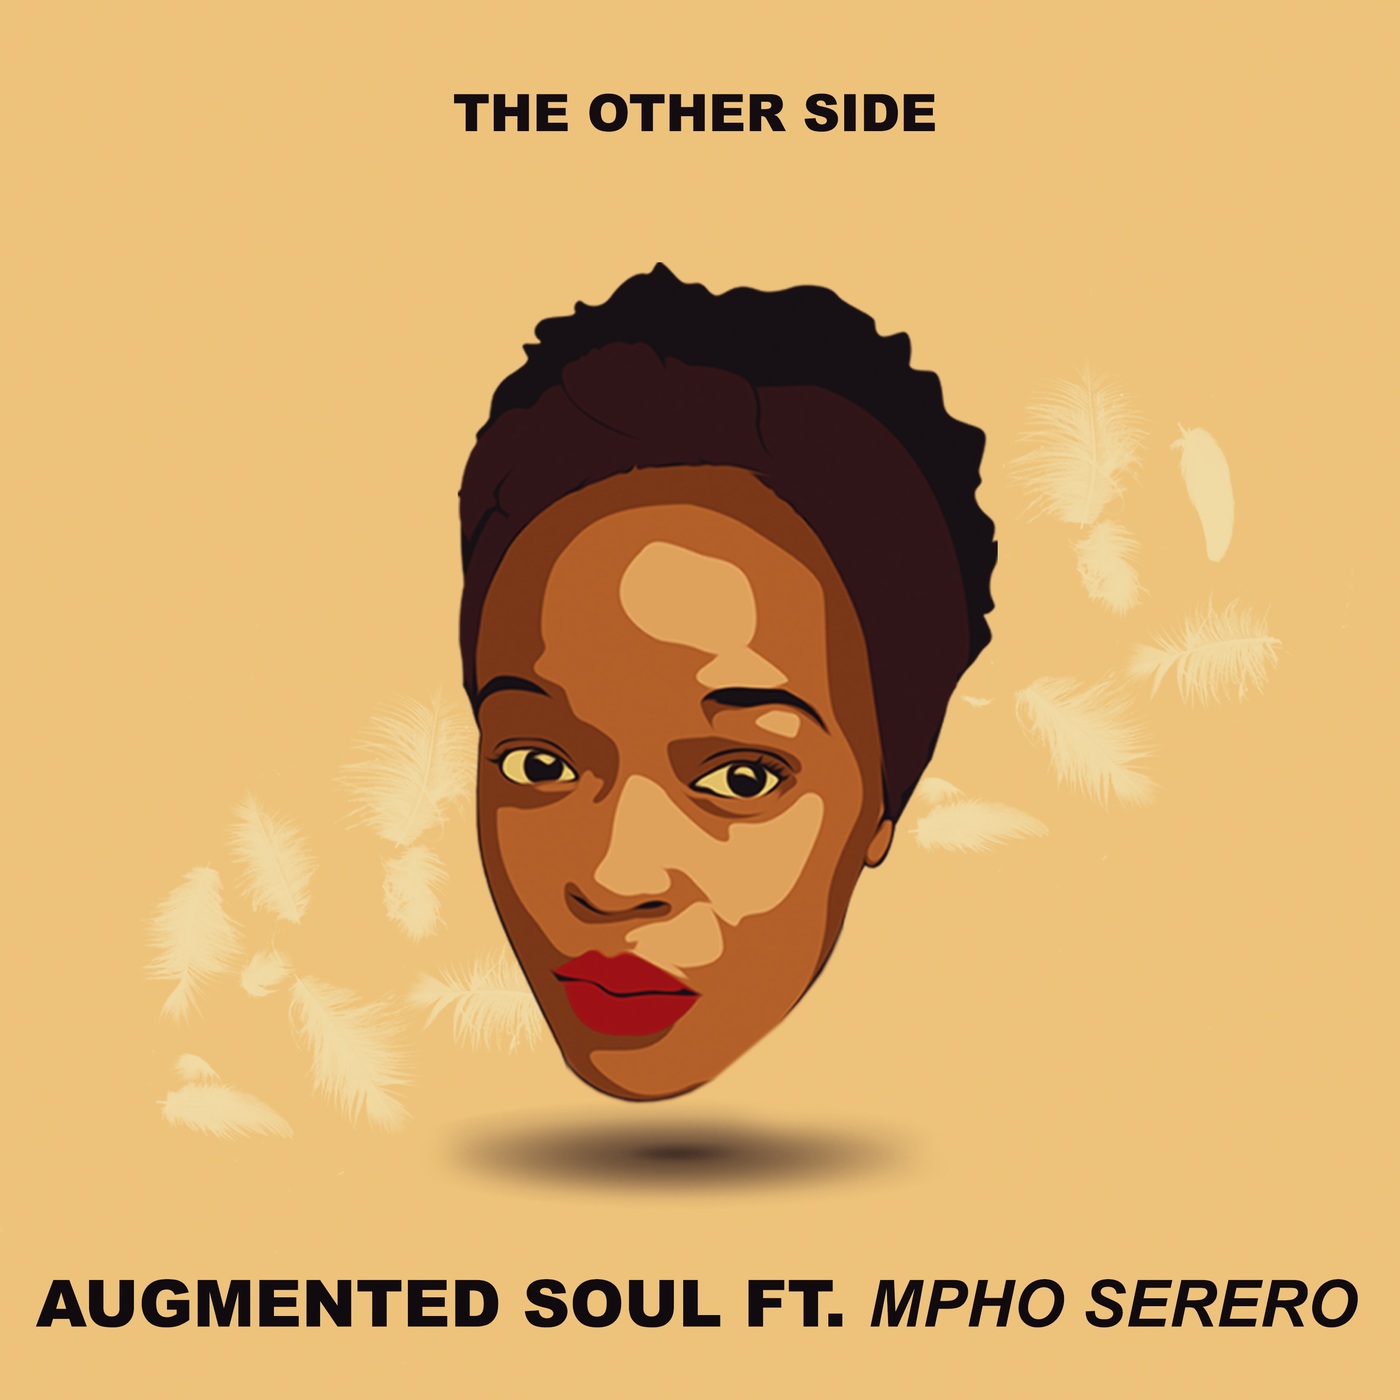 Augmented Soul ft Mpho Serero - The Other Side / Augmented Soul (Pty) Ltd